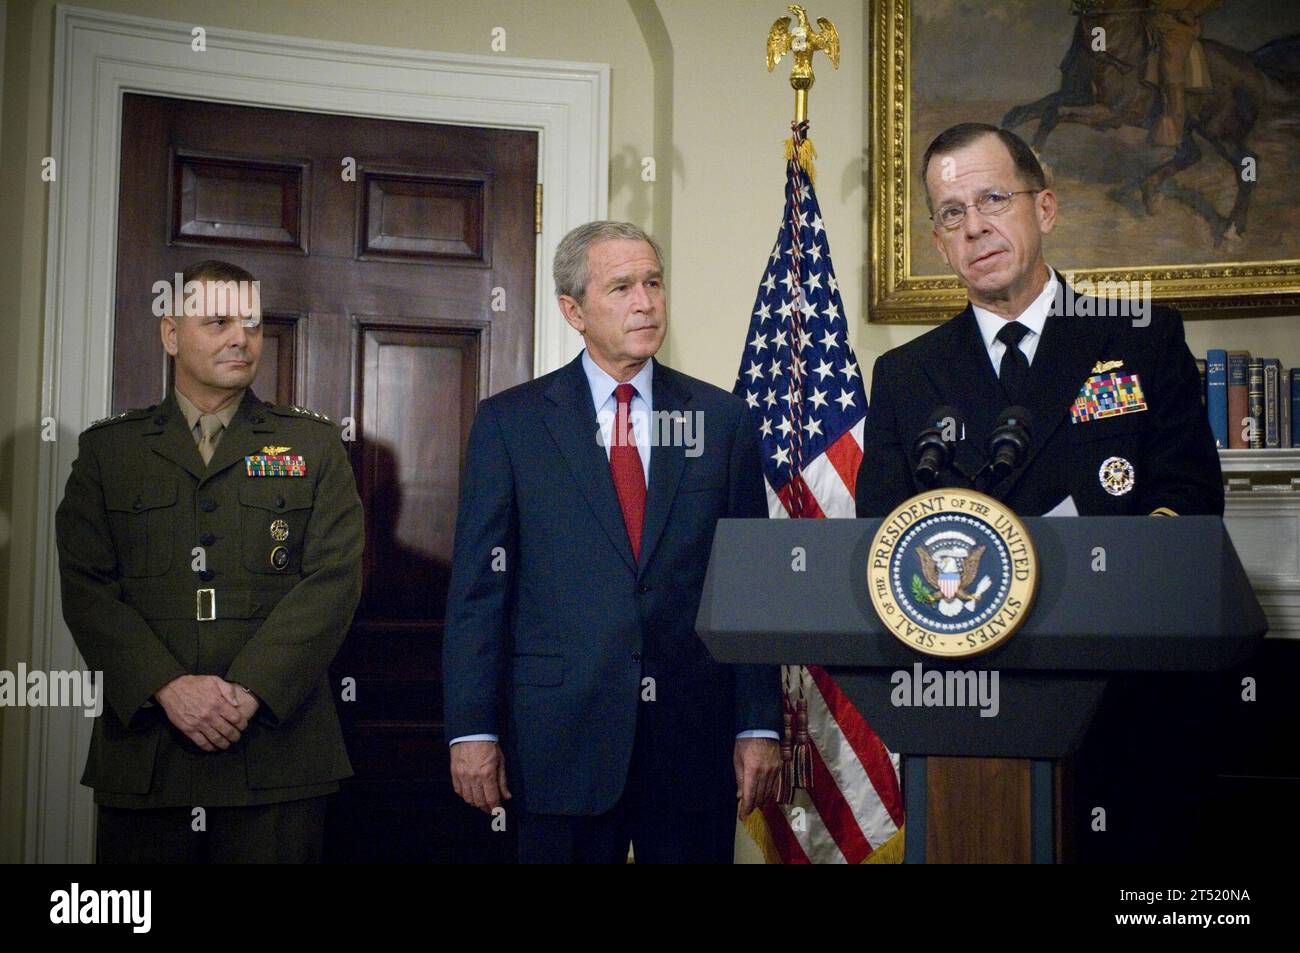 0706280696M-152 WASHINGTON, D.C. (June 28, 2007) - Chief of Naval Operations (CNO) Adm. Mike Mullen speaks following his nomination by President George W. Bush as Chairman of the Joint Chiefs of Staff. Commander, United States Strategic Command, Gen. James E. Cartwright was nominated as Vice-Chairman of the Joint Chiefs of Staff. The nominations were held in the Roosevelt Room at the White House. U.S. Navy Stock Photo